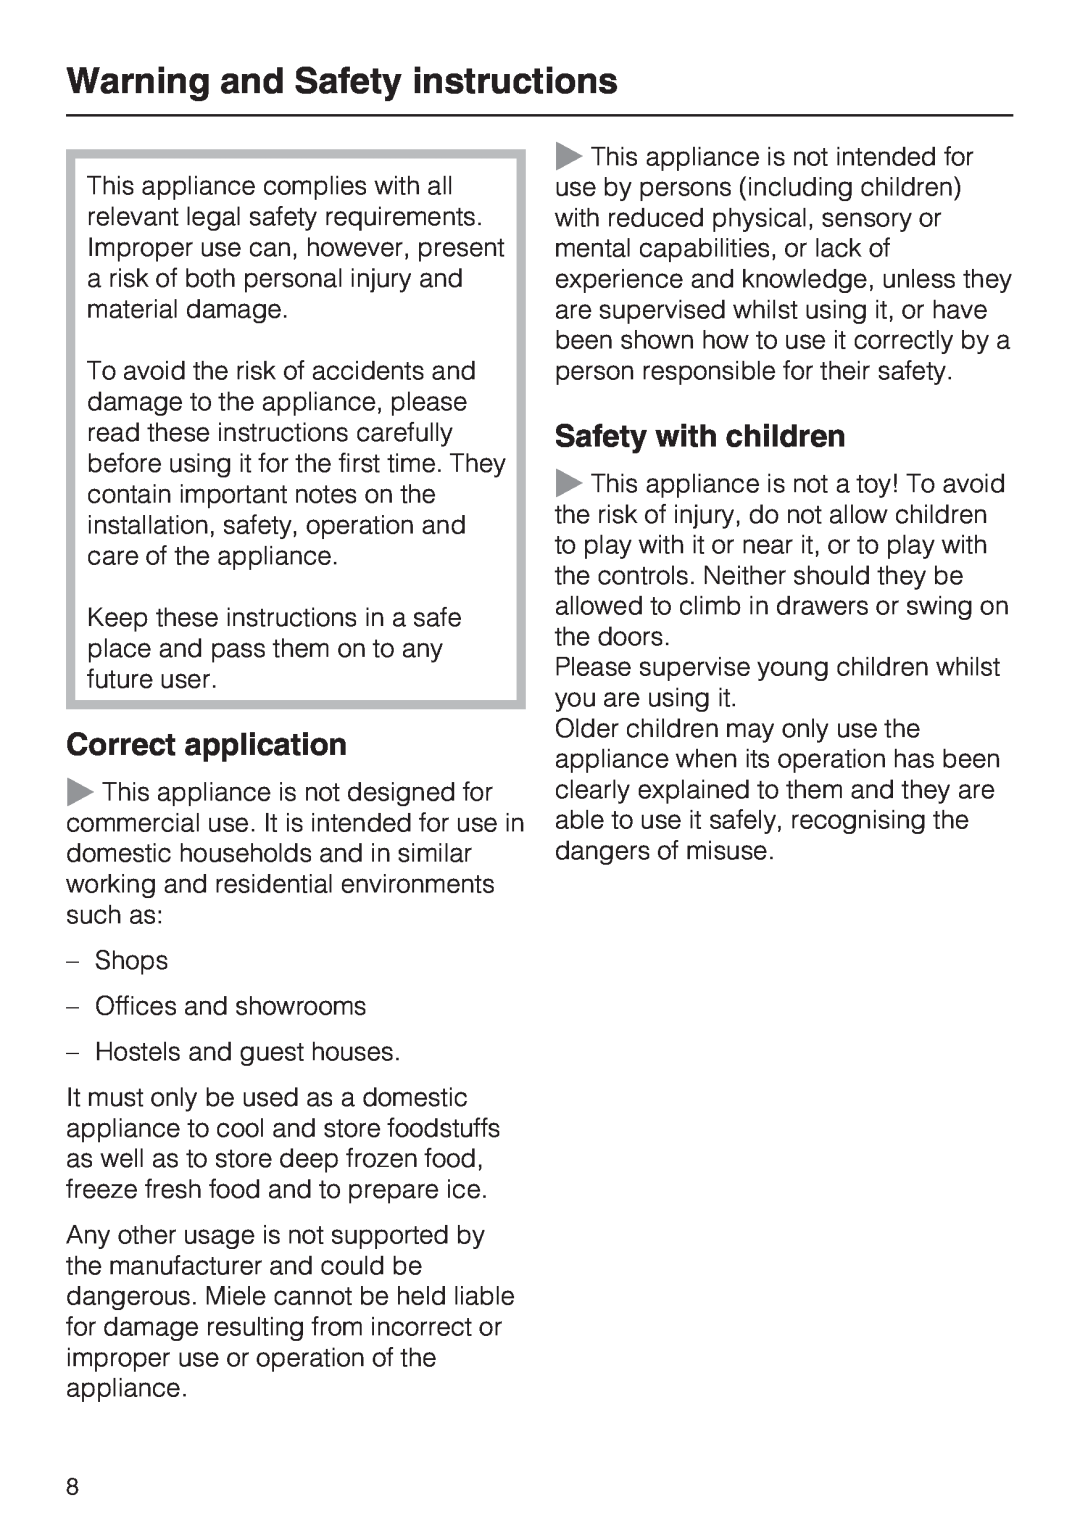 Miele KFN 14947 SDE ED installation instructions Warning and Safety instructions, Correct application, Safety with children 